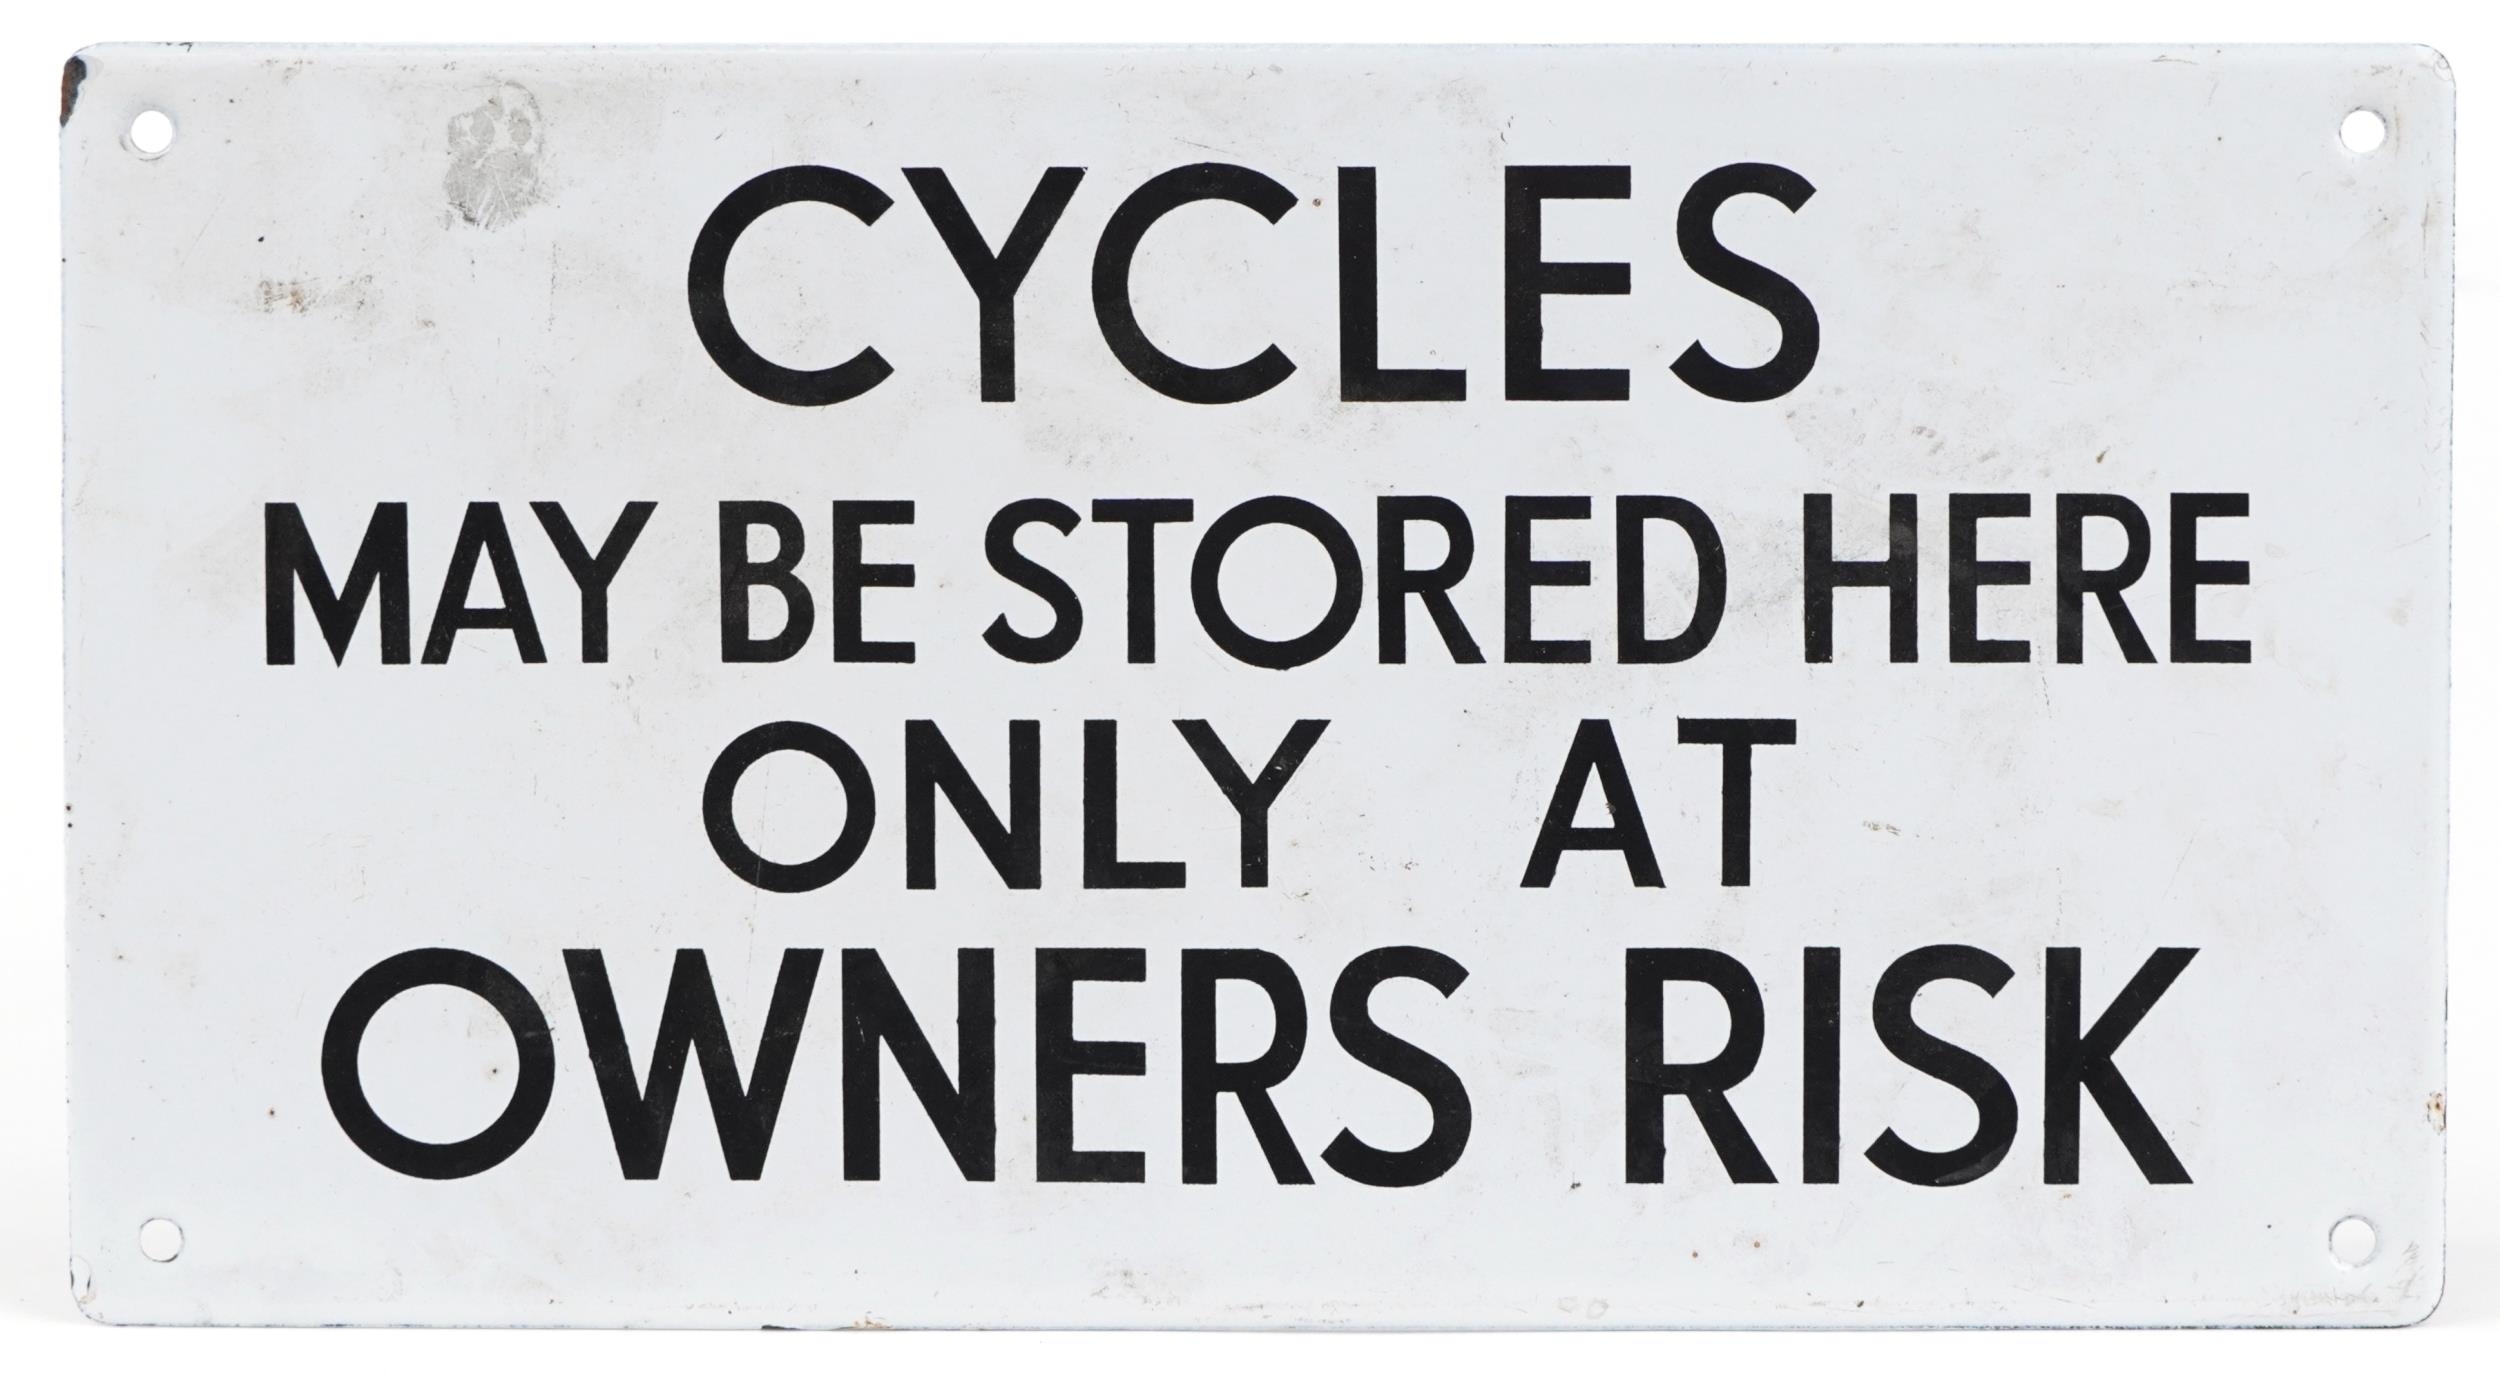 Vintage Cycles May Be Stored Here Only at Owner's Risk enamel advertising sign, 33cm x 18cm